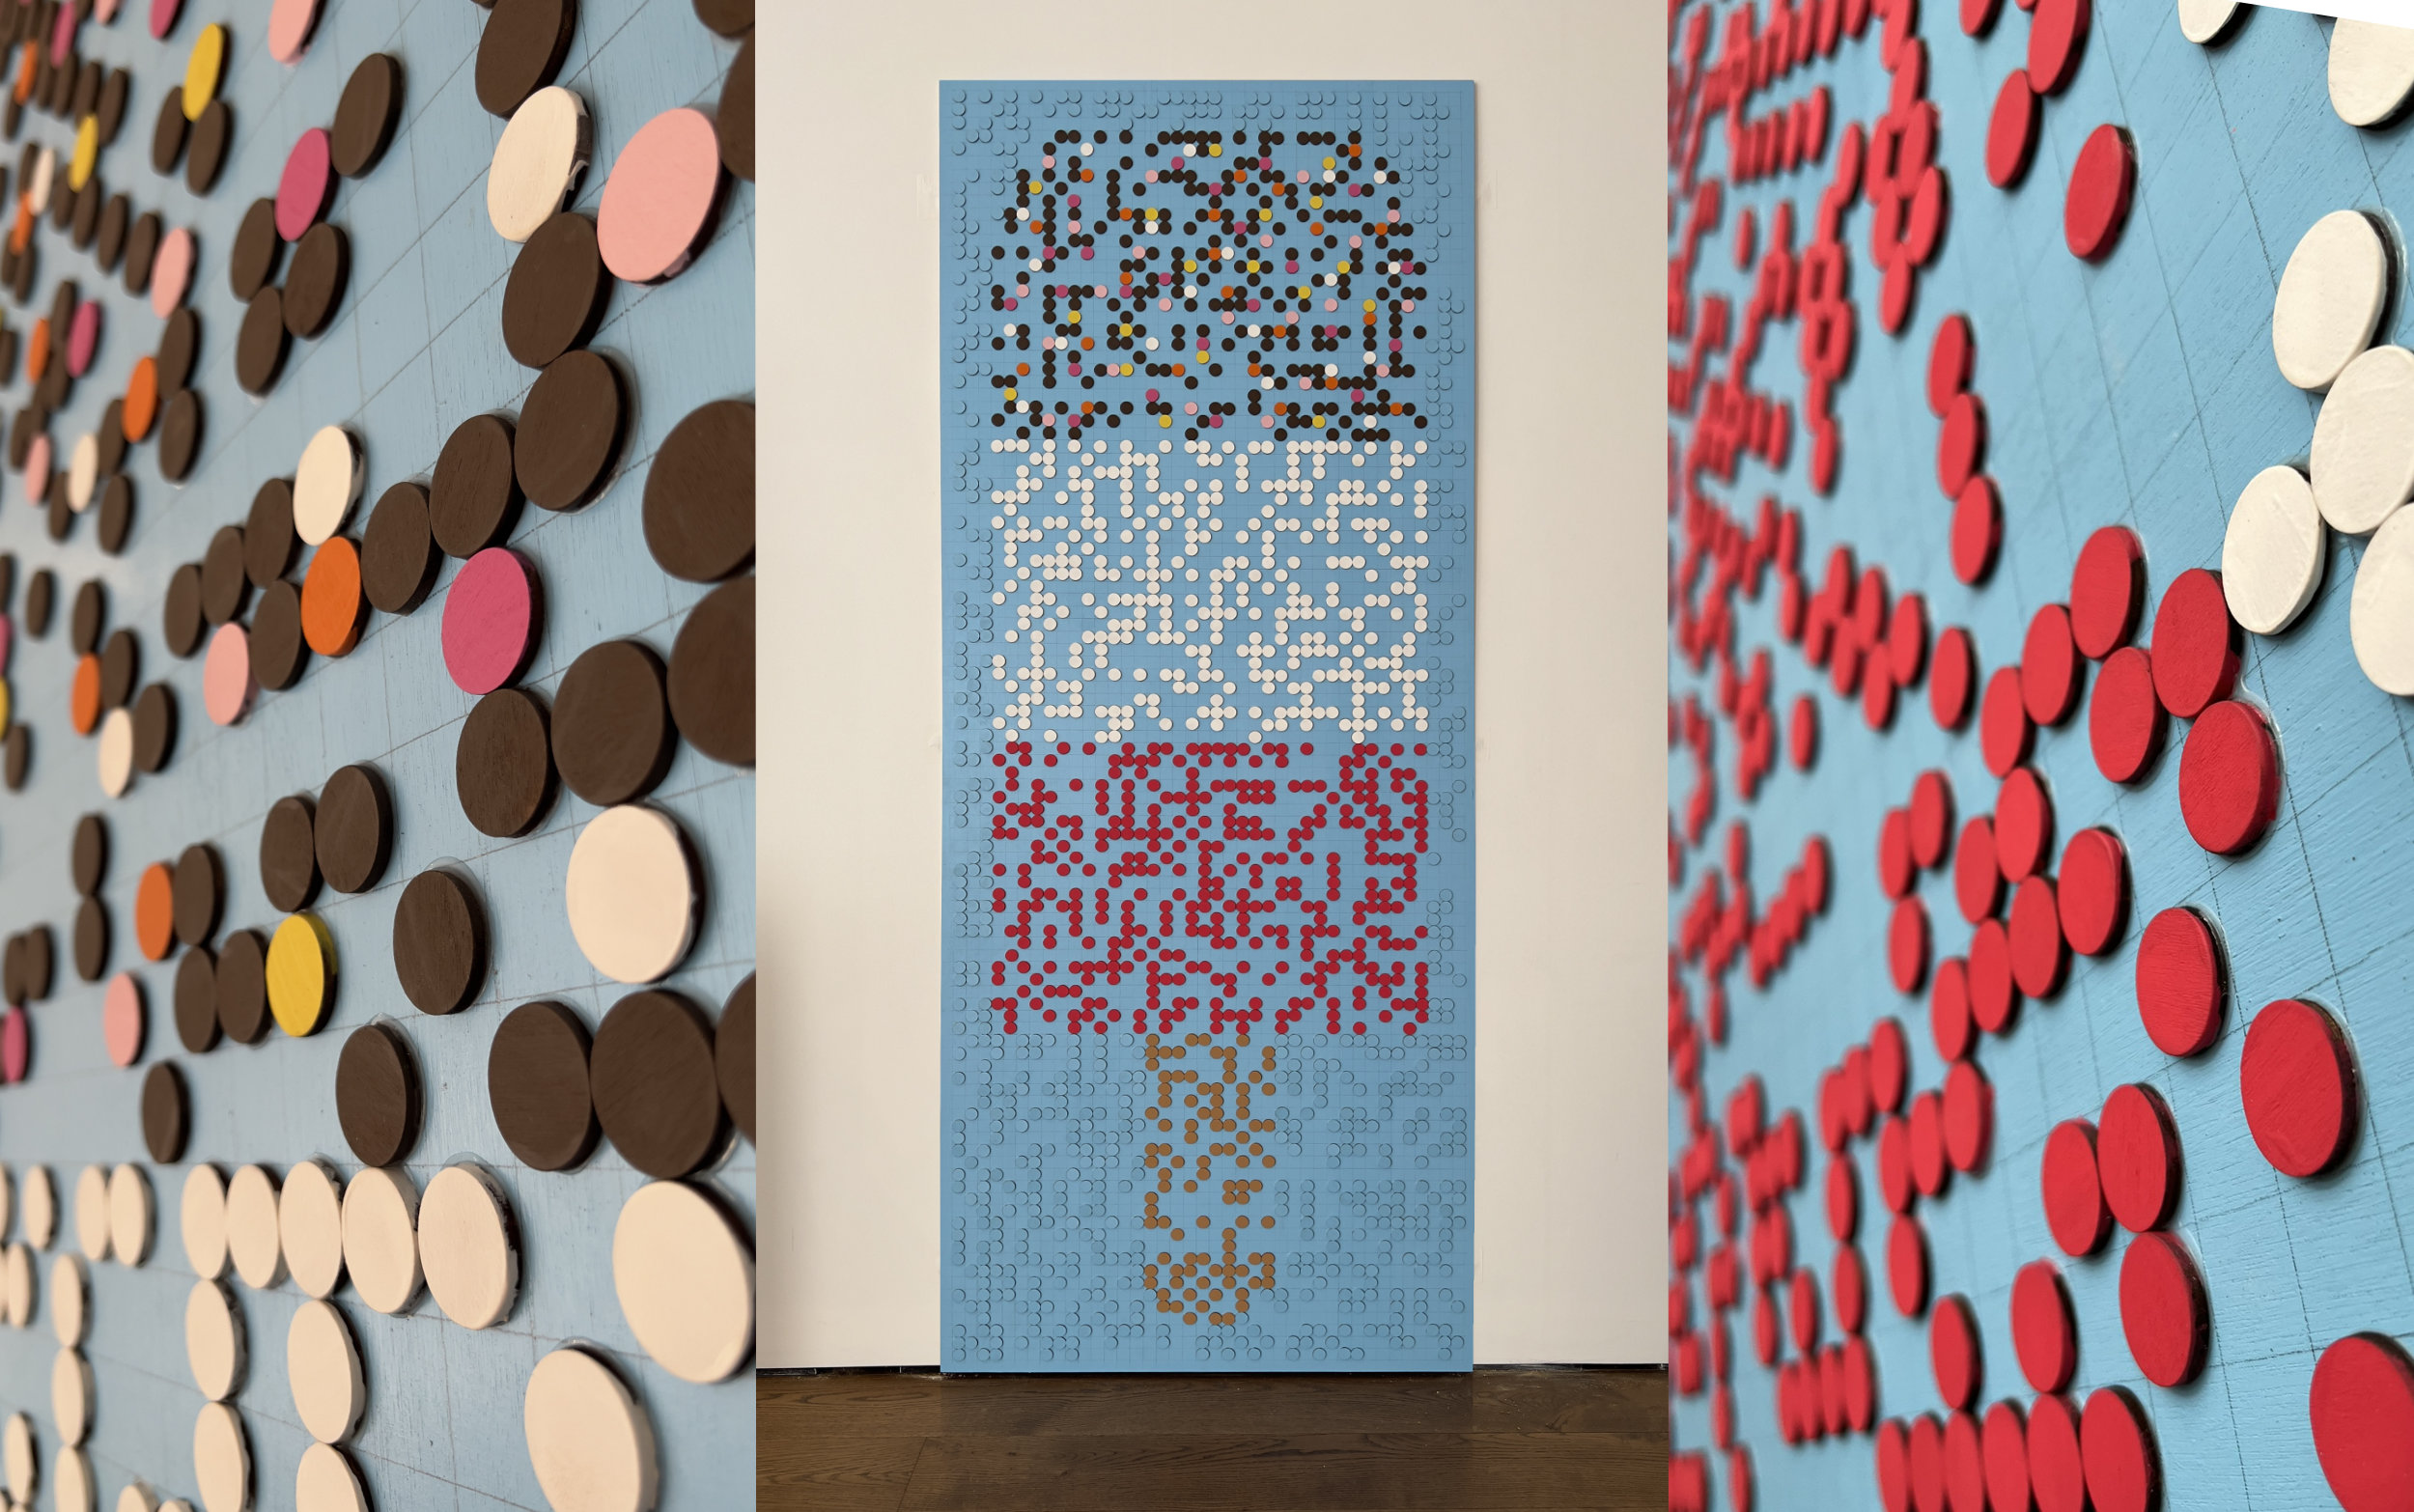 A montage of three perspectives of the work. The central image shows the colourful shape of a Fab lolly is shown on a bright blue background. The image is made of braille in spots of different colours to show the lolly’s chocolate-dipped top, bands of red and white and the lolly’s stick.